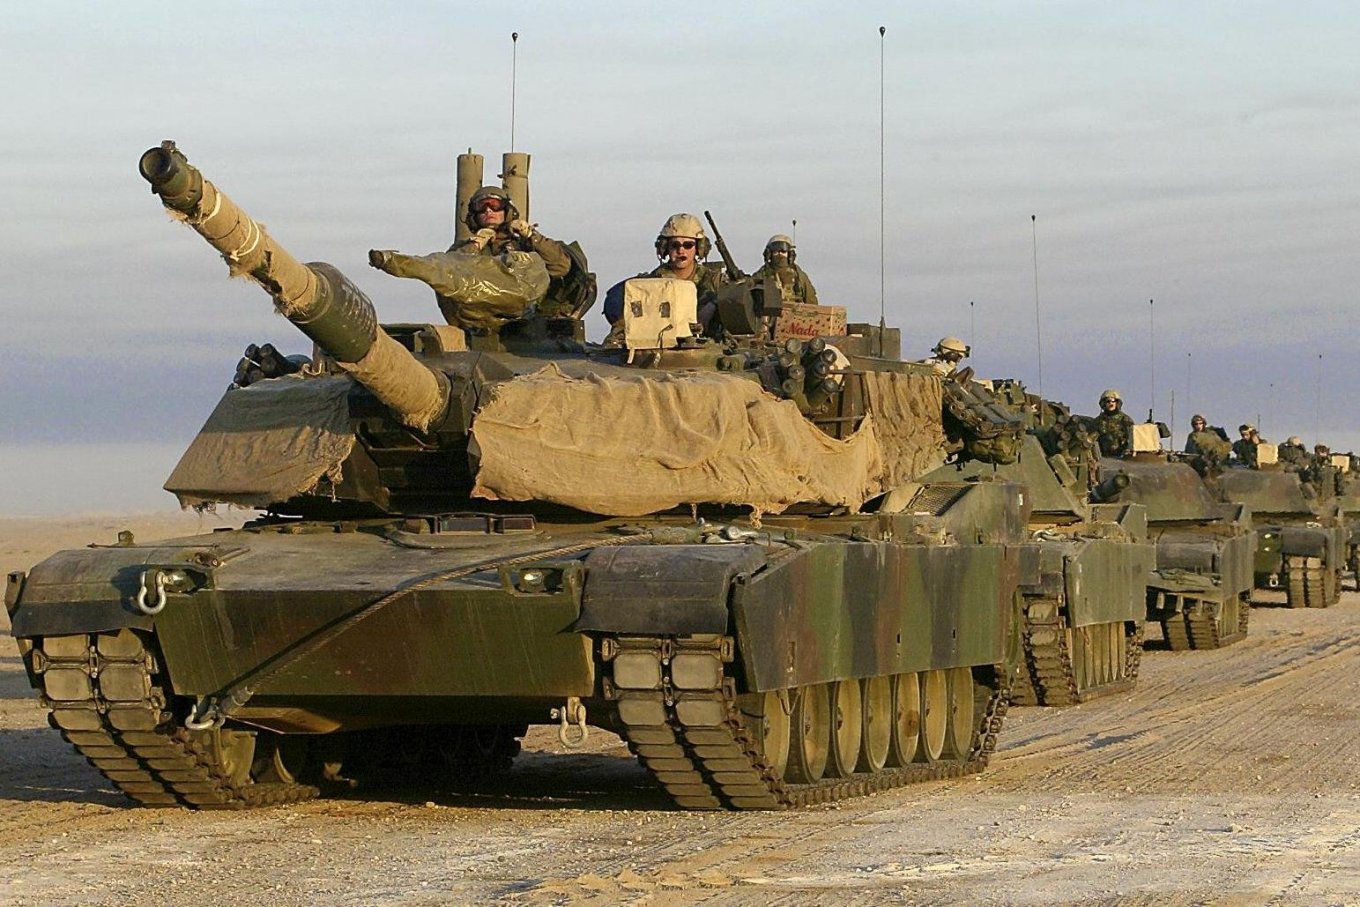 United States is sending 31 Abrams tanks and other military equipment to Ukraine, Defense Express